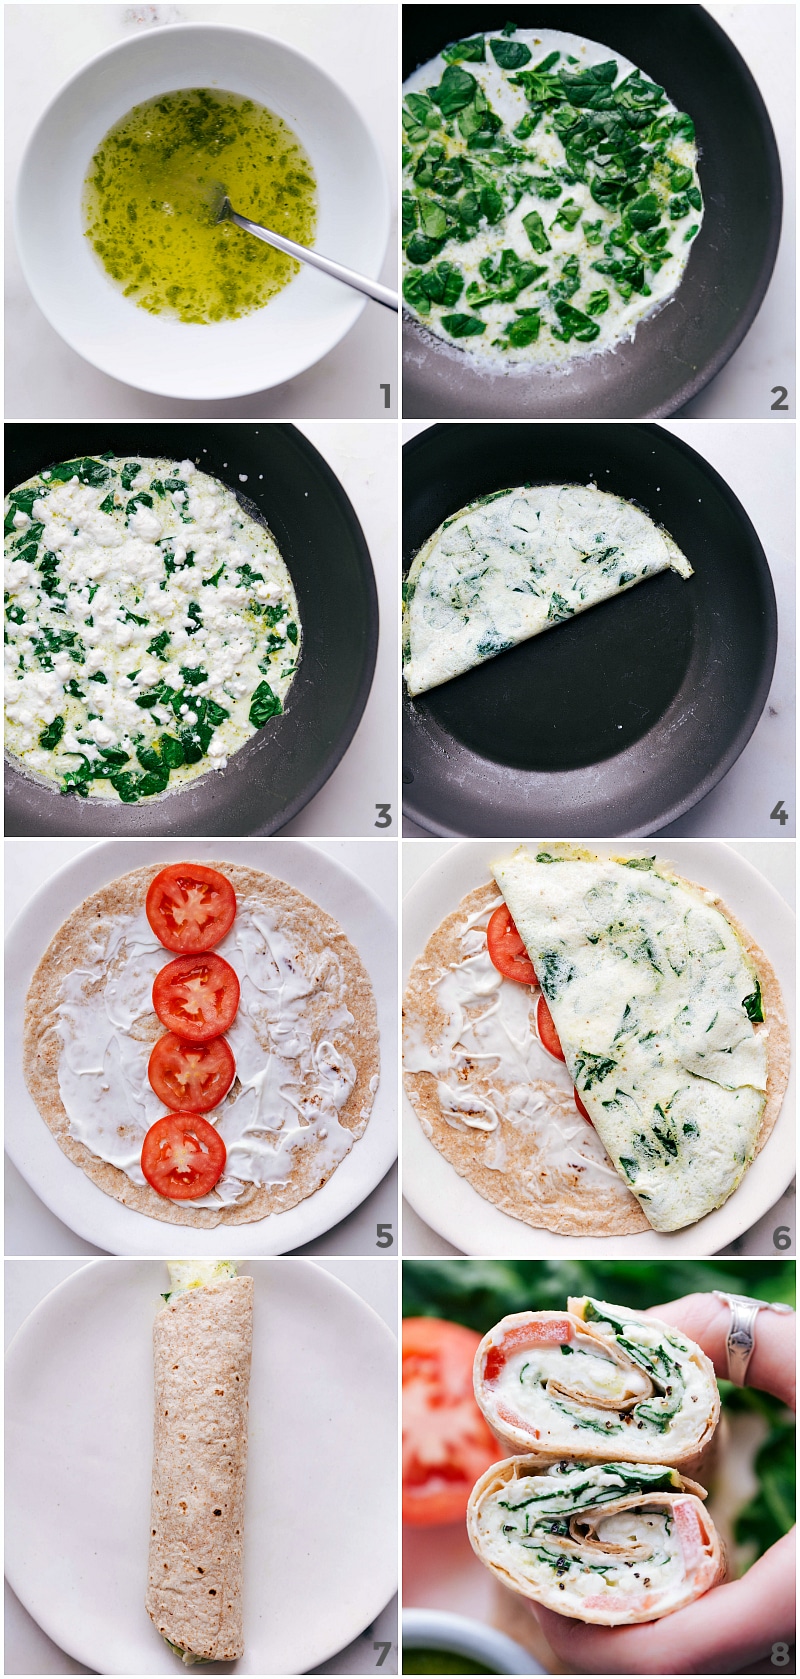 Process shots-- images of the egg whites being mixed with the pesto, then showing the spinach being mixed in, then everything being added to a tortilla and rolled up.